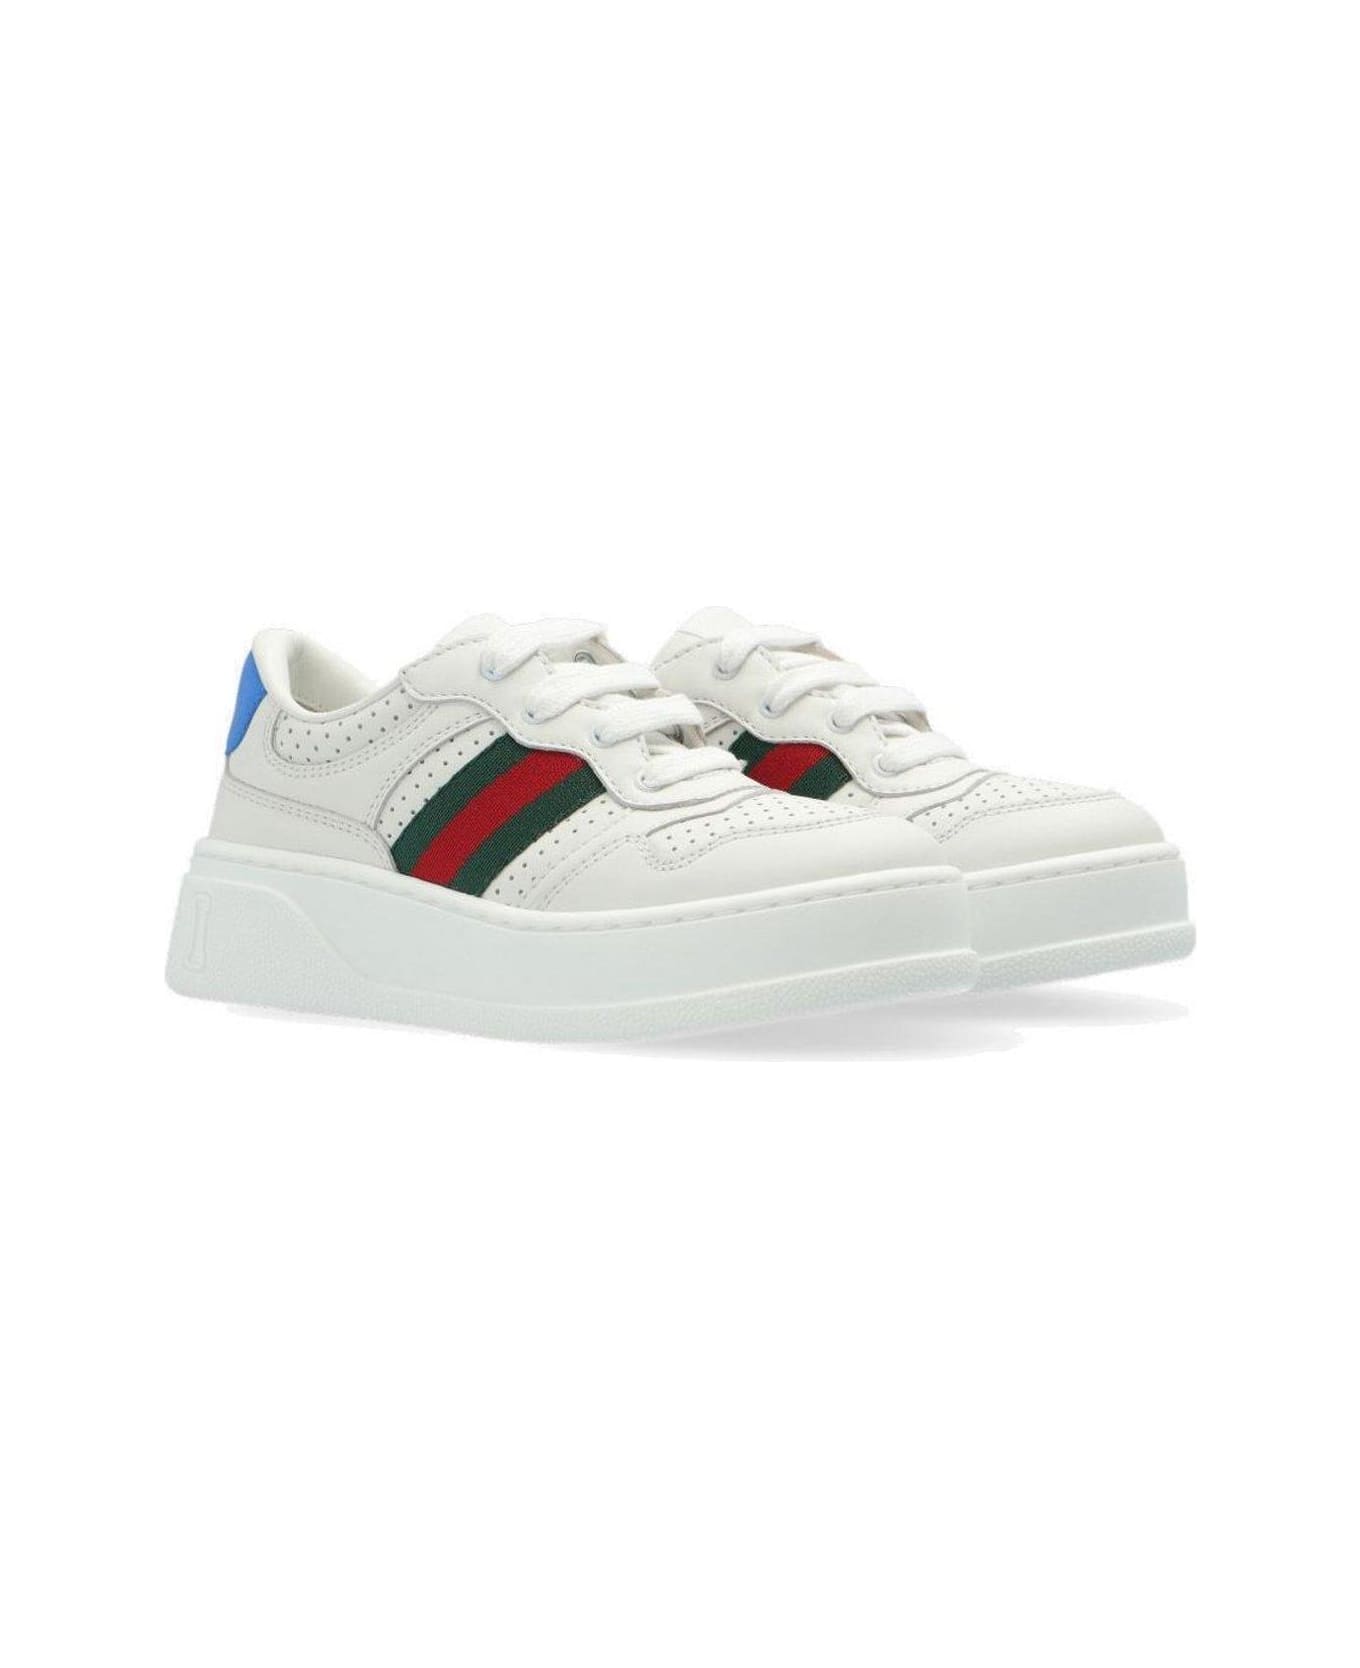 Gucci Round Toe Chunky Sneakers - Bianco